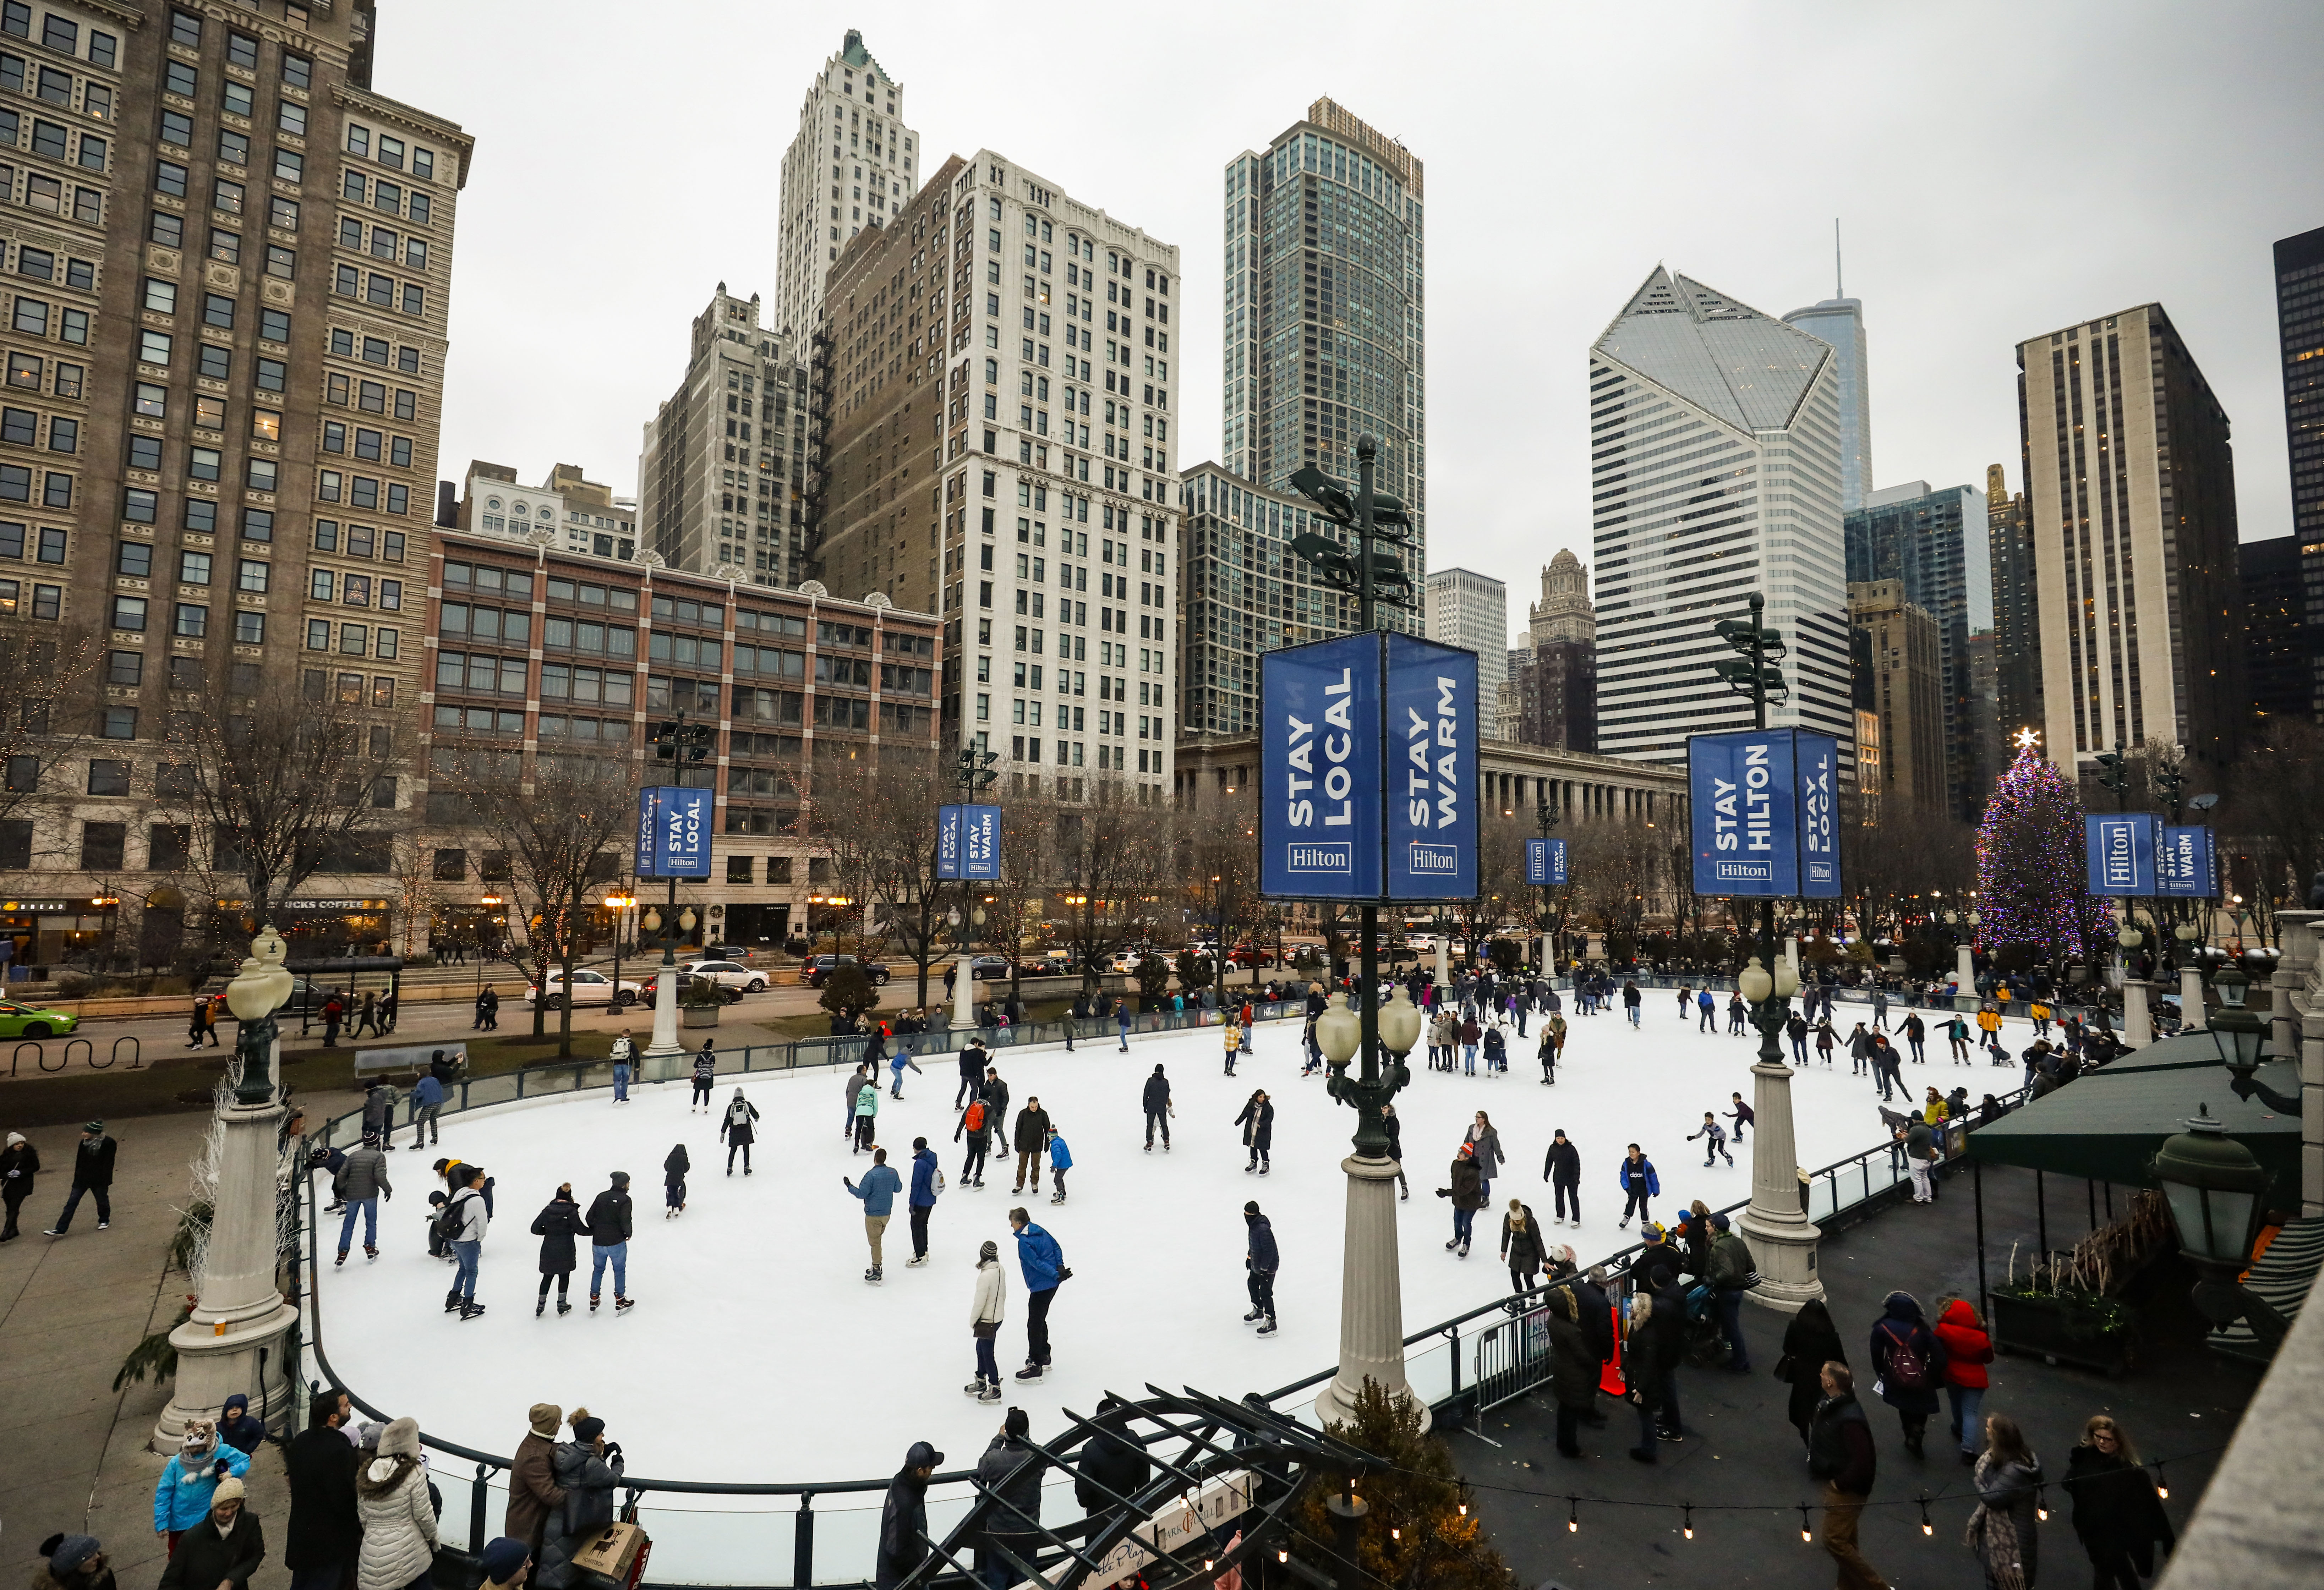 Wintertime Is Here: A Breakdown of Holiday Events Starting This Weekend in Chicago, From Ice Skating to the Tree-Lighting Parade